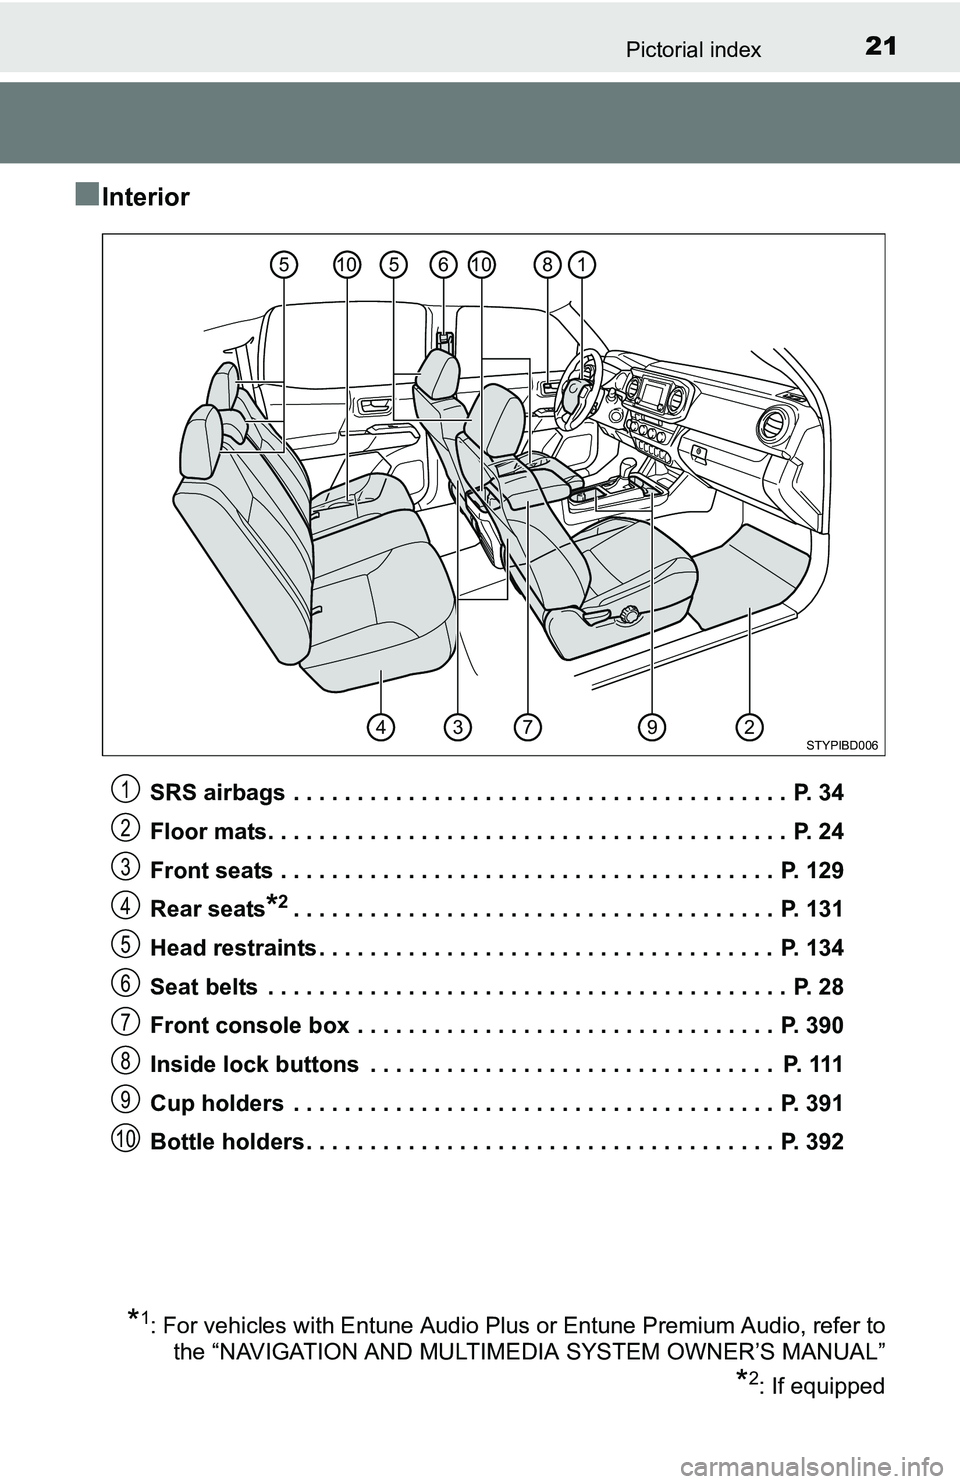 TOYOTA TACOMA 2016  Owners Manual (in English) 21Pictorial index
■Interior
SRS airbags  . . . . . . . . . . . . . . . . . . . . . . . . . . . . . . . . . . . . . . .  P. 34
Floor mats. . . . . . . . . . . . . . . . . . . . . . . . . . . . . . . 